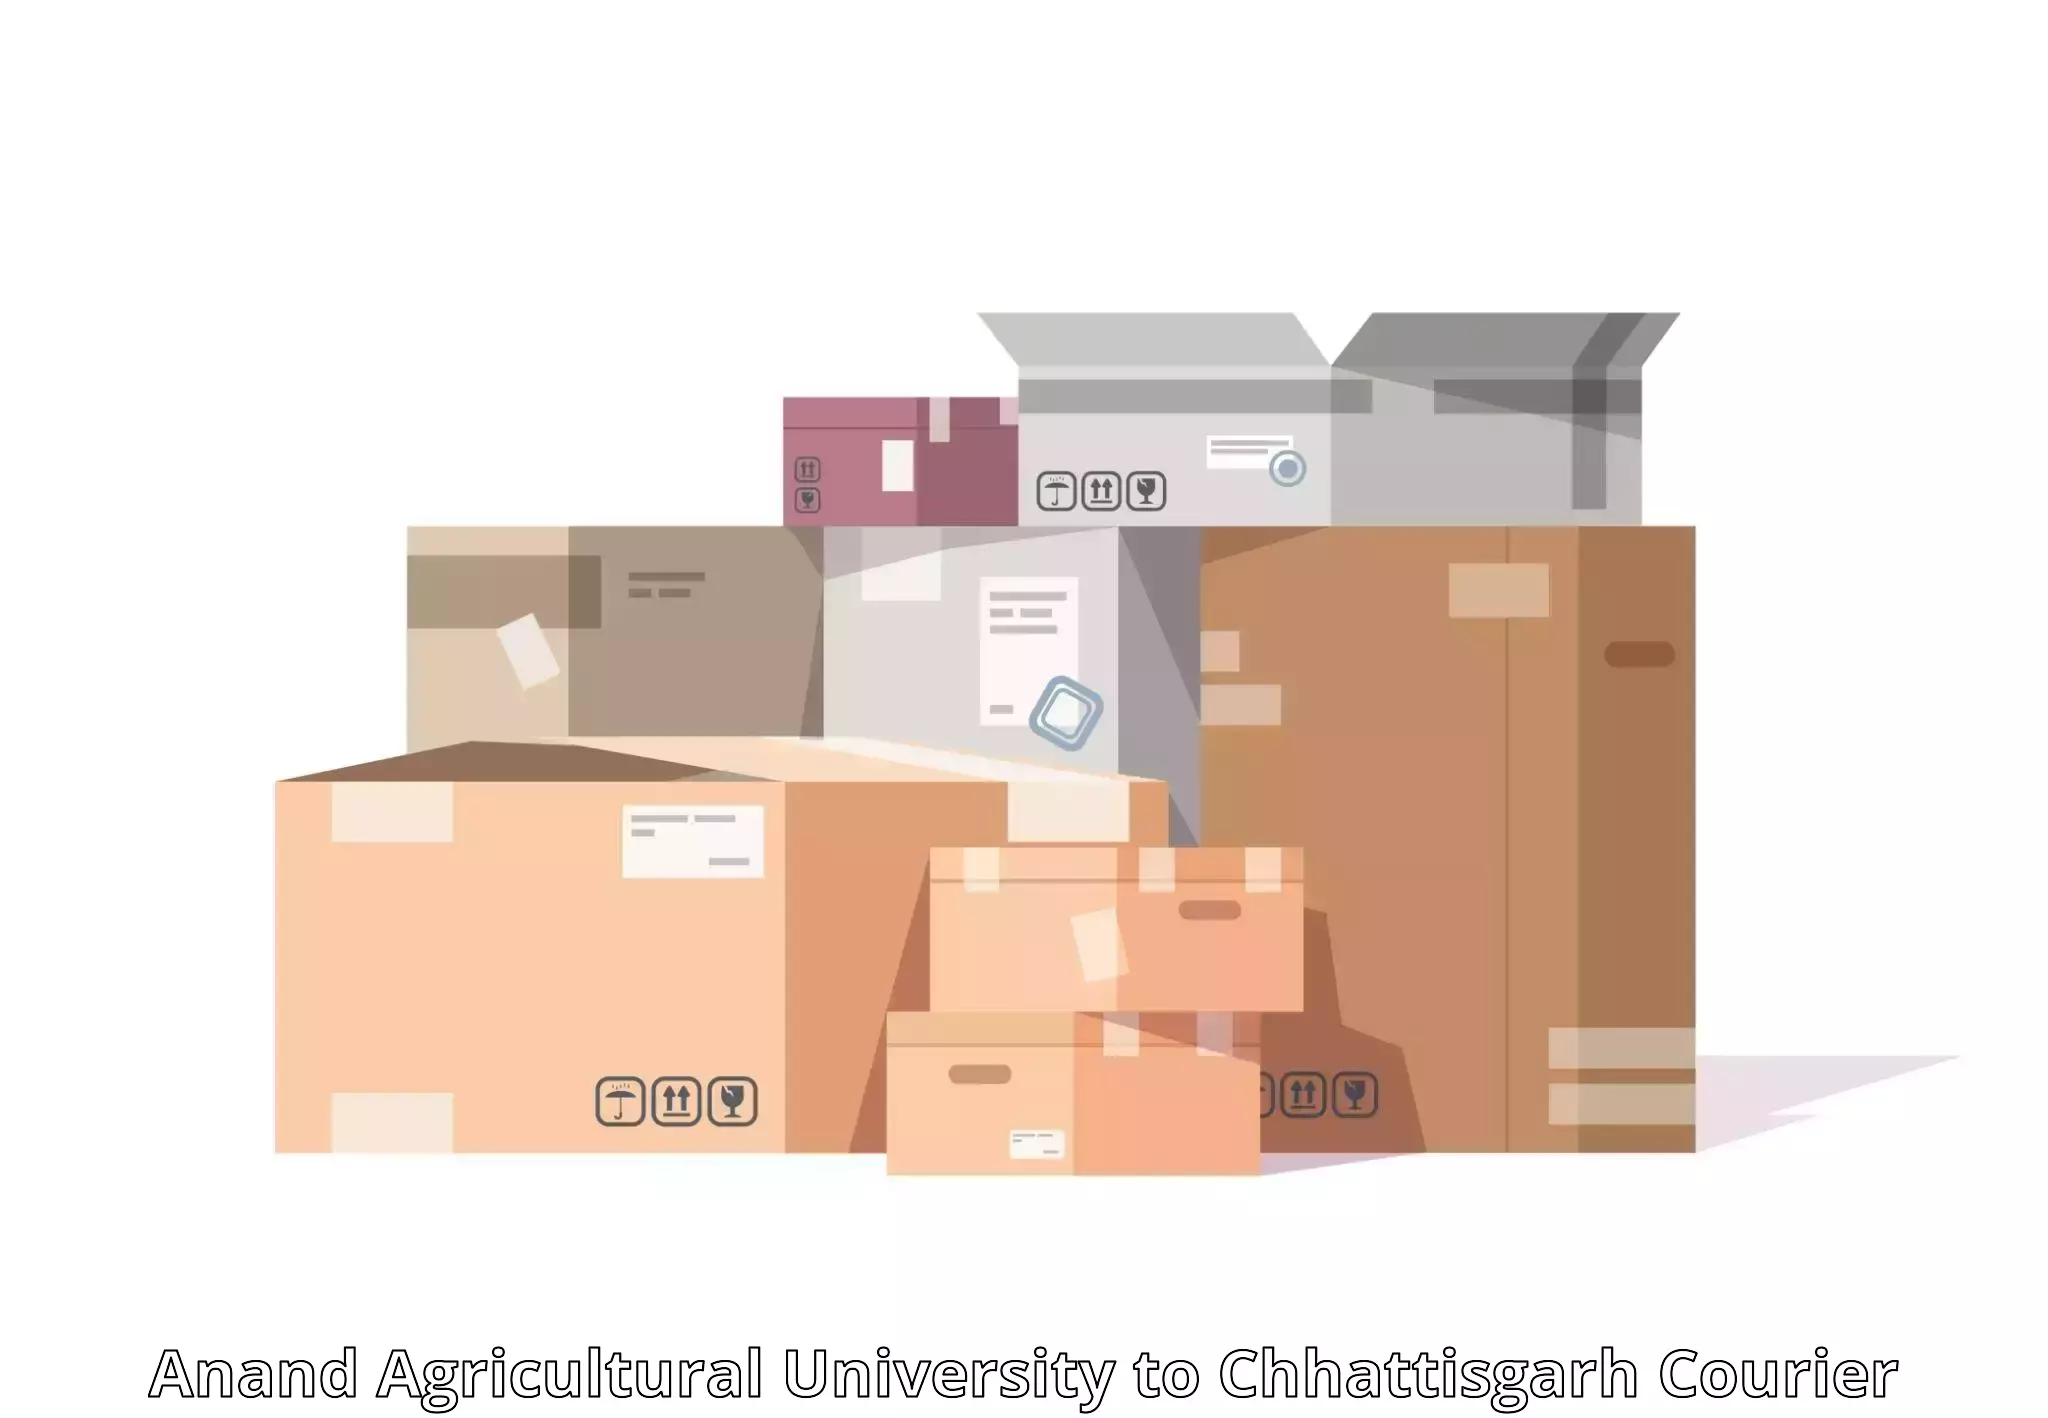 Package consolidation Anand Agricultural University to Bastar